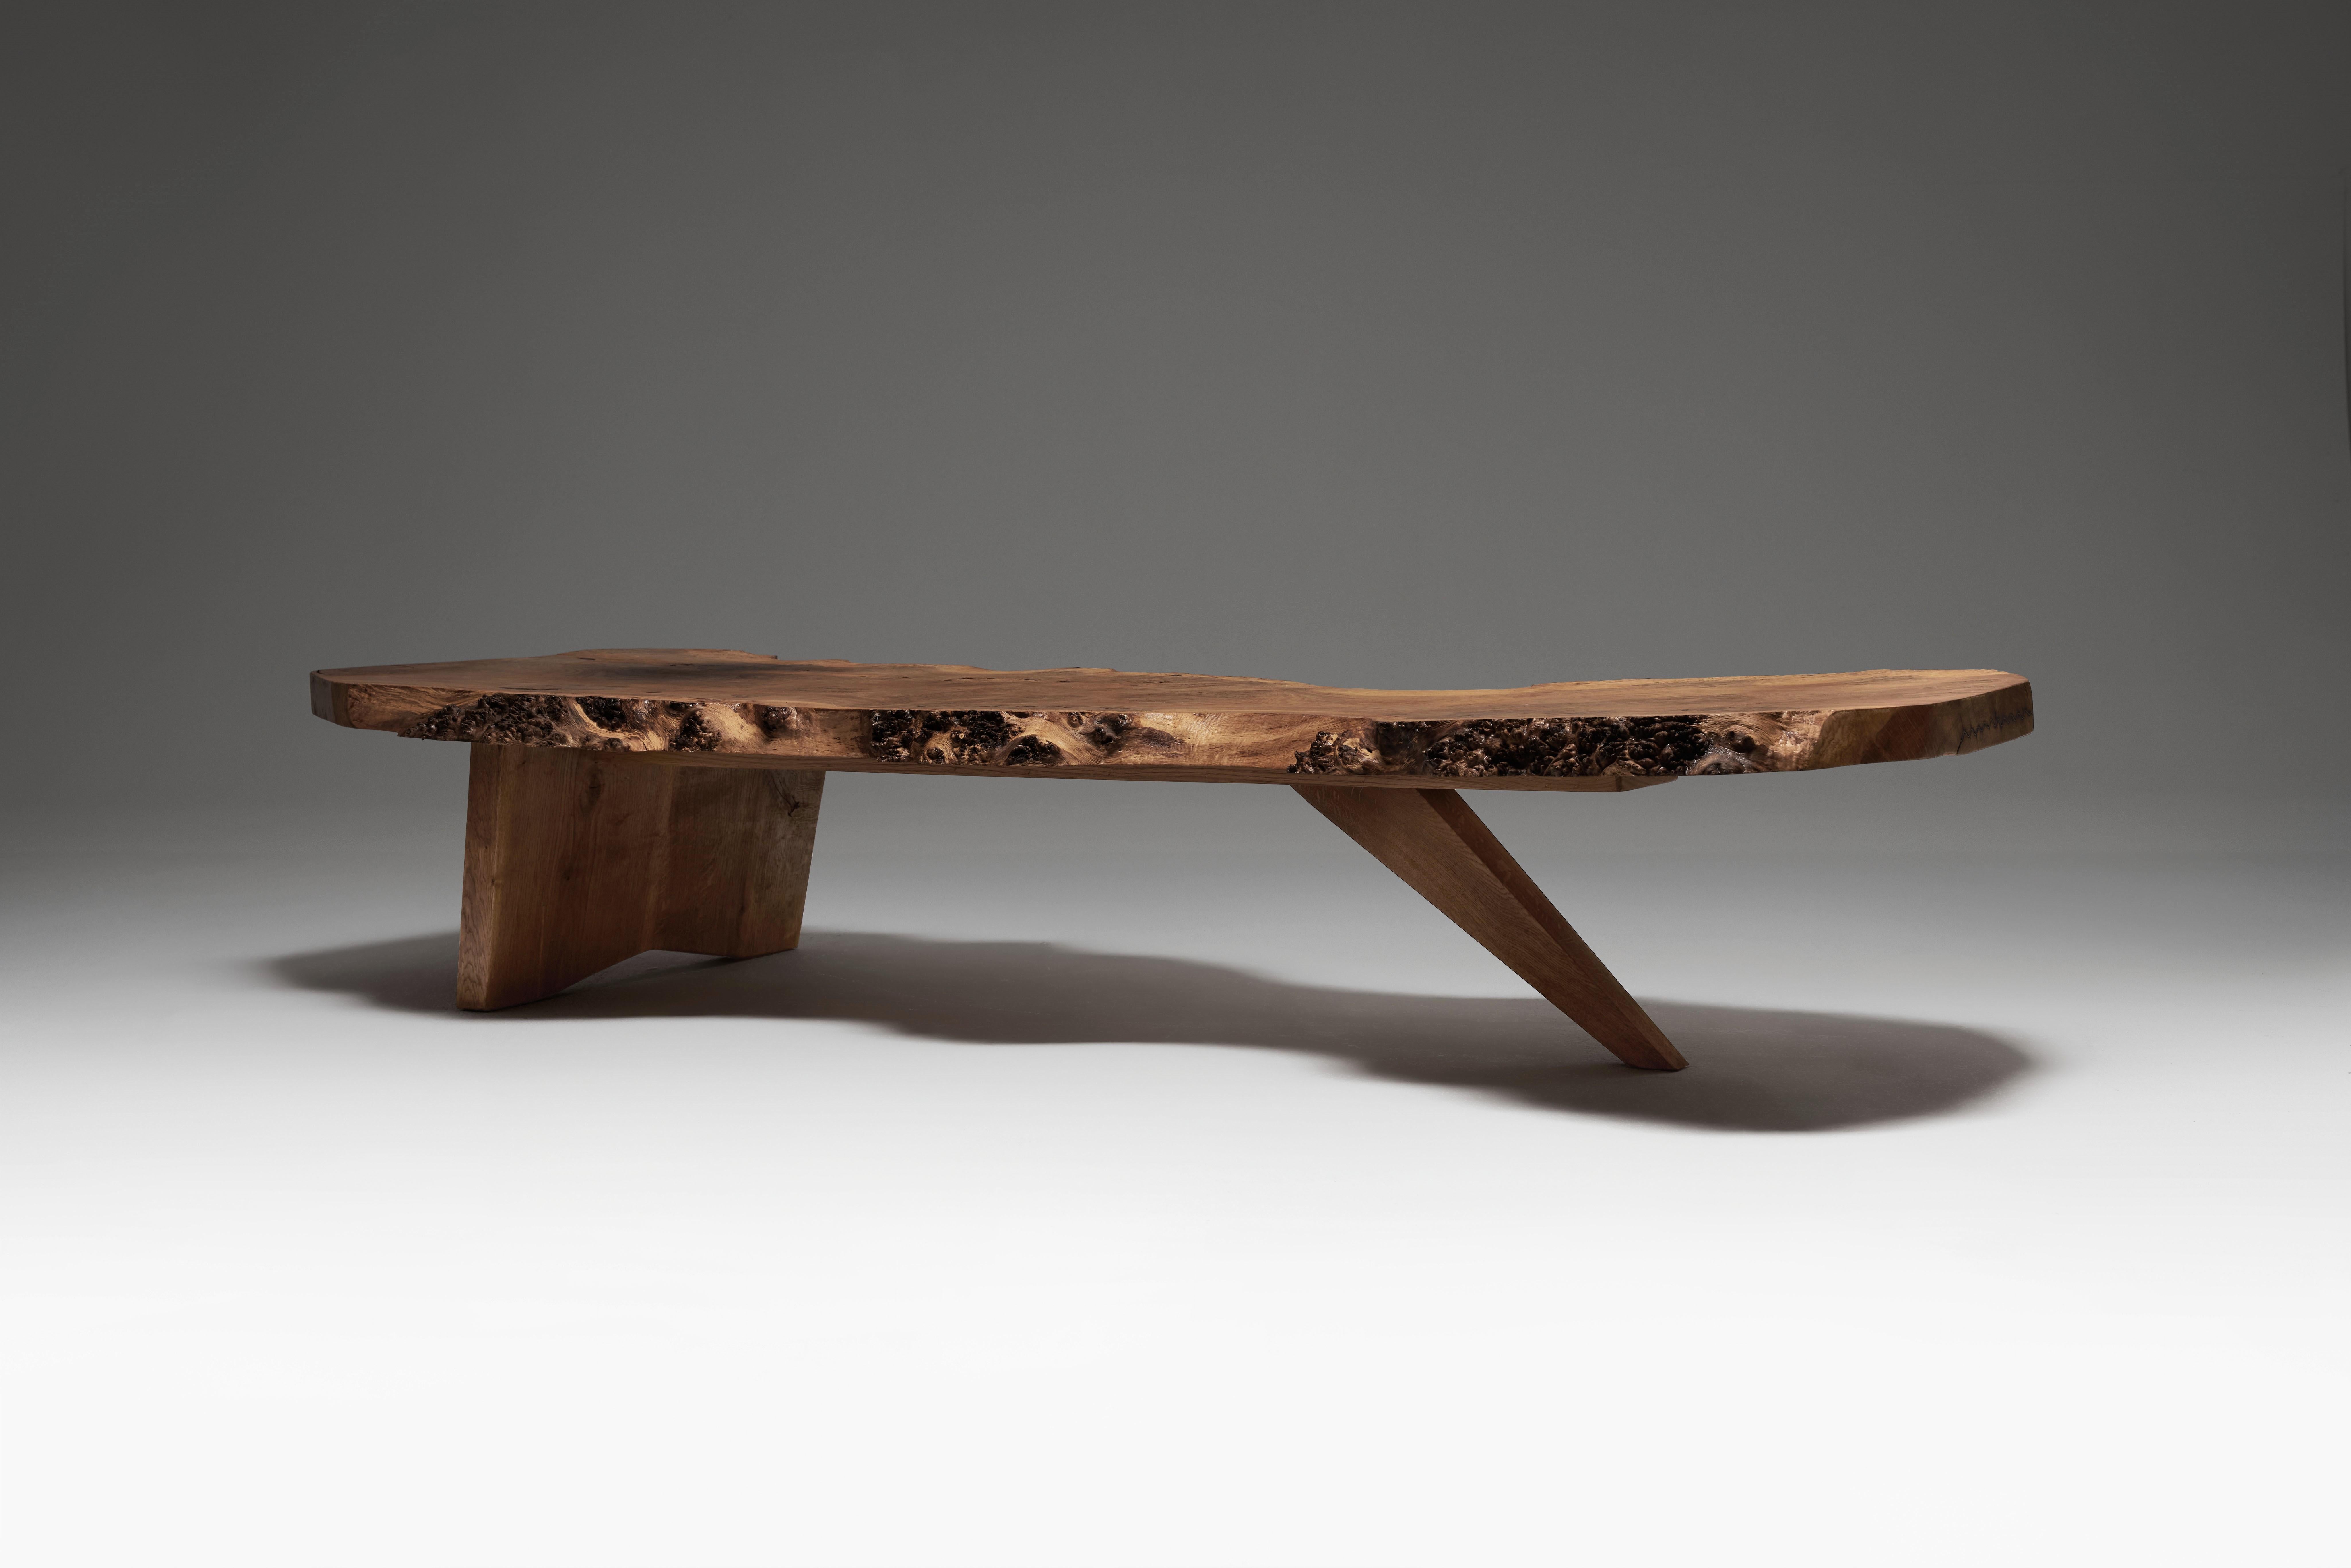 This exceptional free-form coffee table hails from England in the 1970s.
 Crafted from English oak burl. 
The sublime English oak burl slab is distinguished by its dramatic, undulating free-form edges and textured burls, which imbue the table with